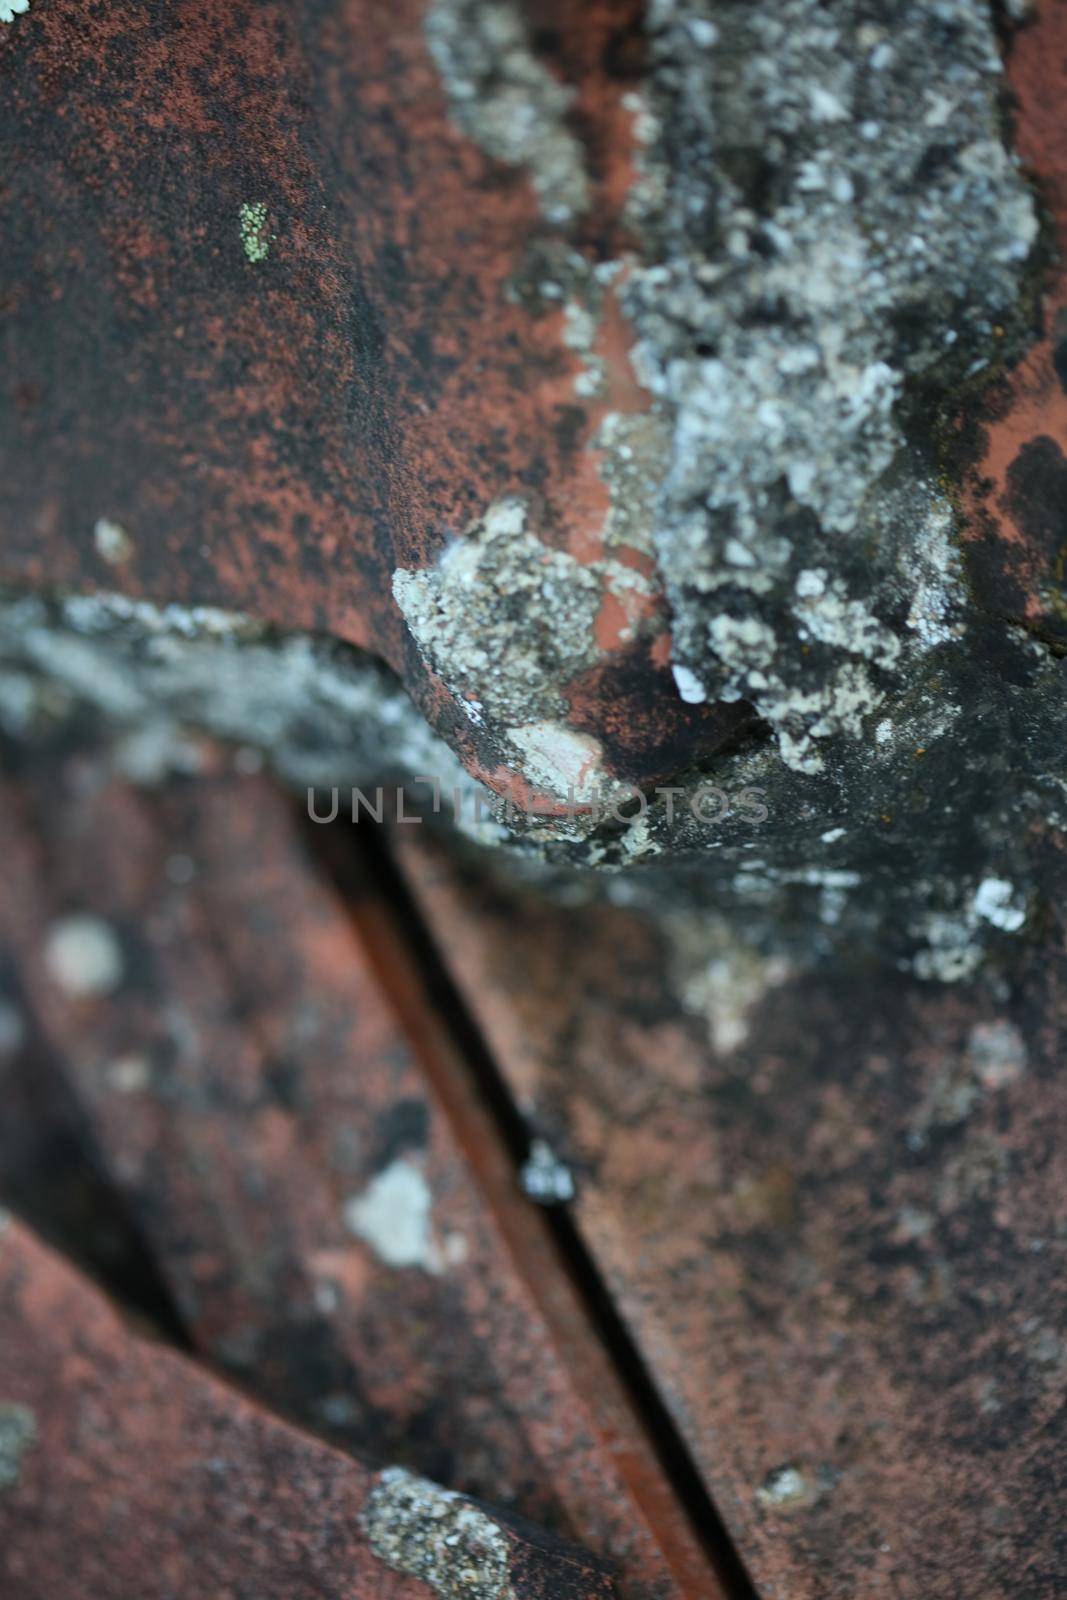 Old roof tiles with lichens closeup vintage background high quality big size prints